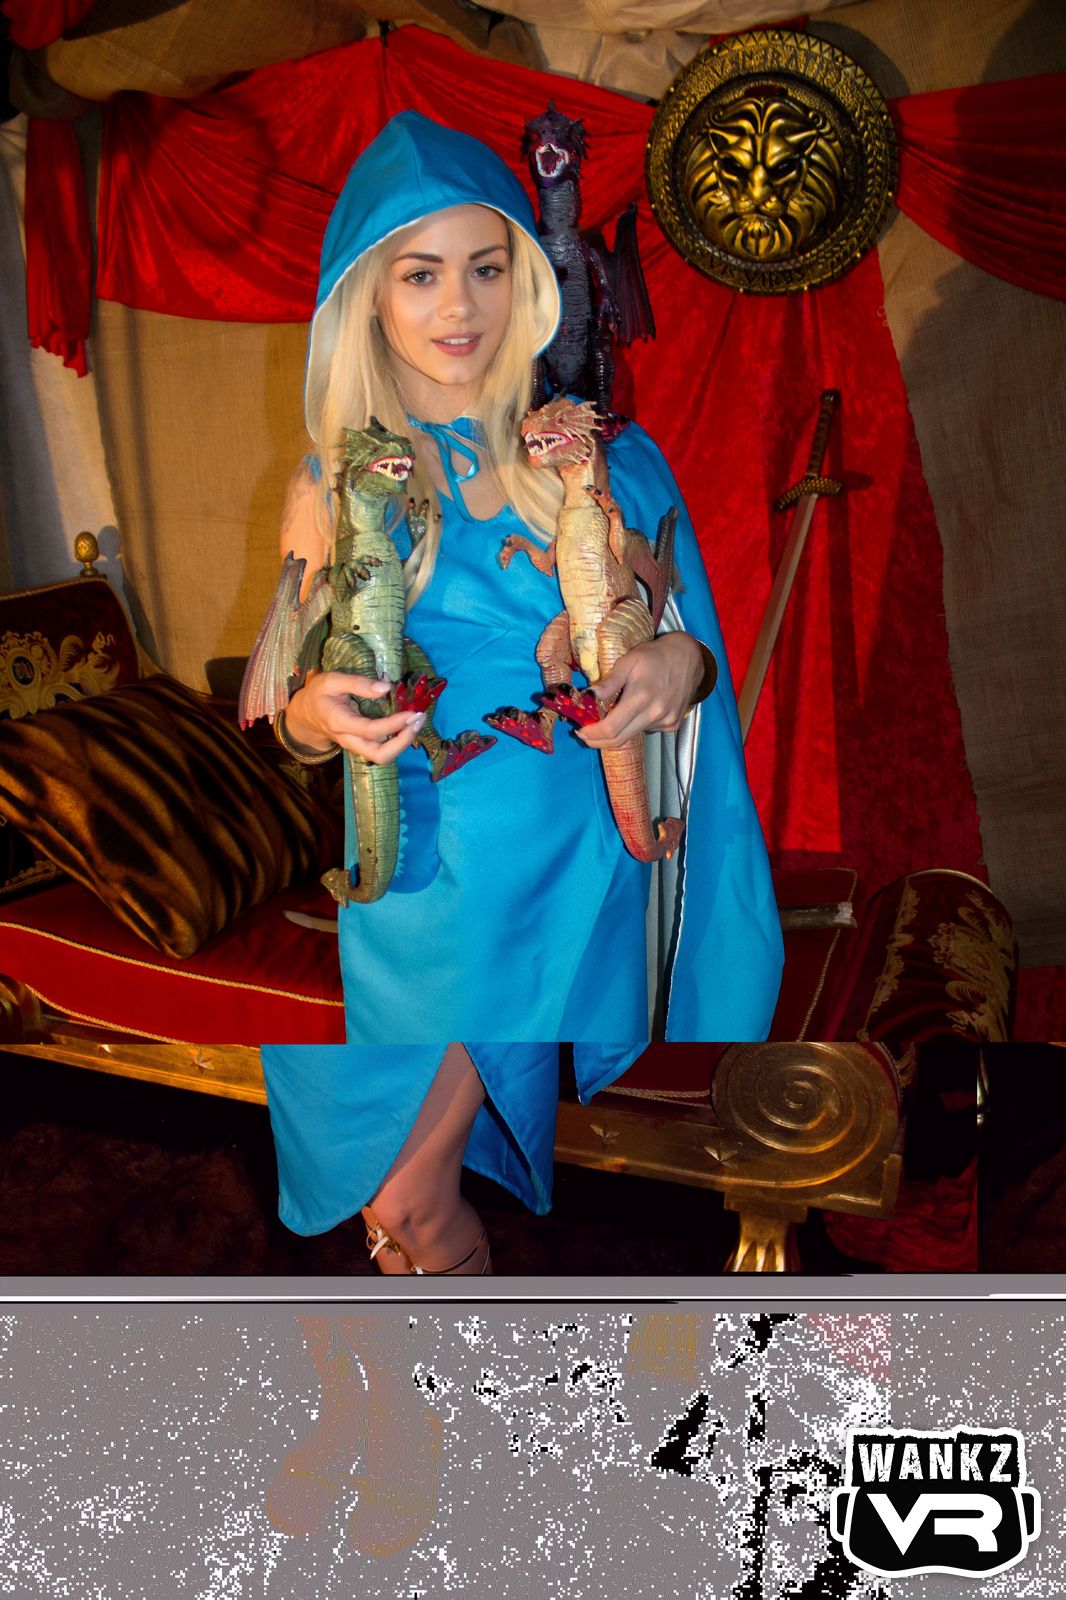 the best game of thrones porn parody featuring elsa jean as daenerys targaryen getting fucked your hard cock 4